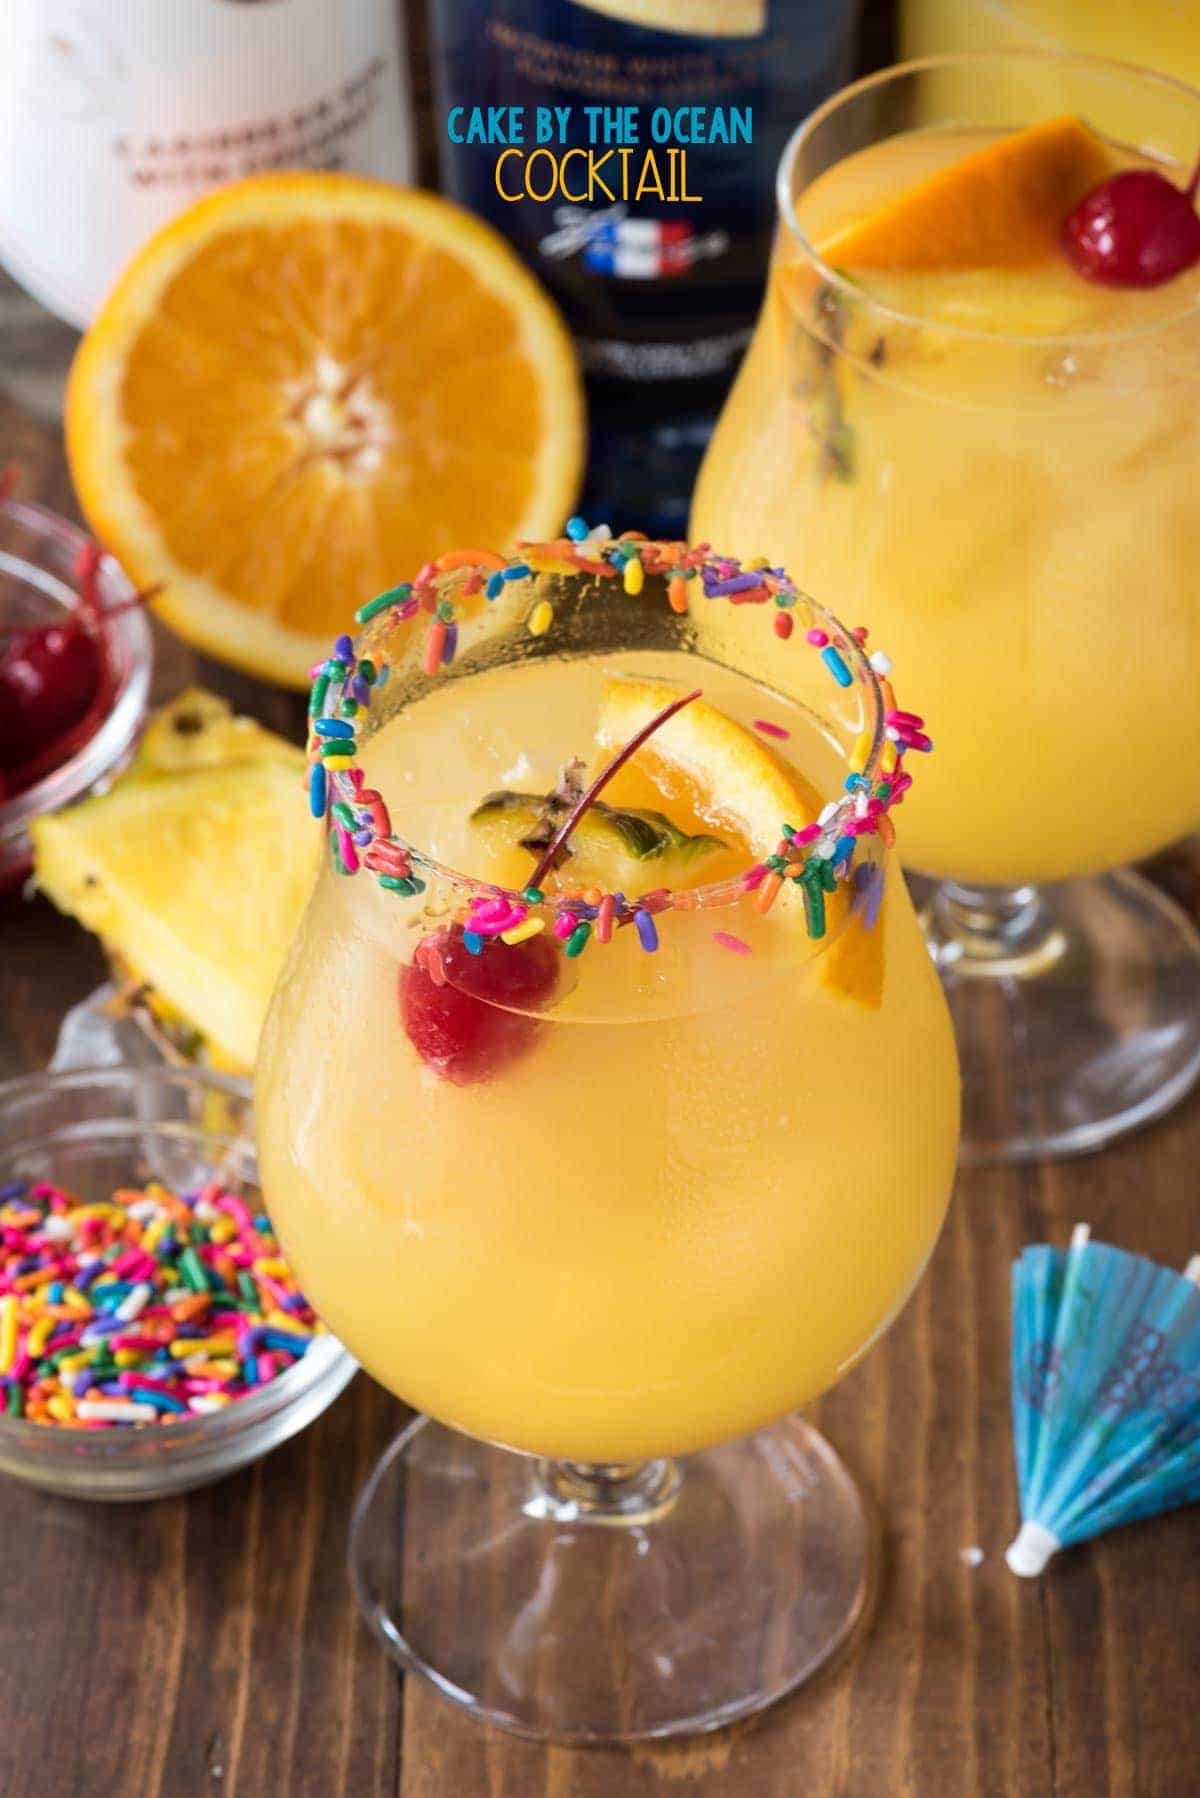 Cake by the Ocean Cocktail made with Cake Vodka, Coconut Rum, Orange and Pineapple Juices! You can whip up a pitcher of these in less than 5 minutes!